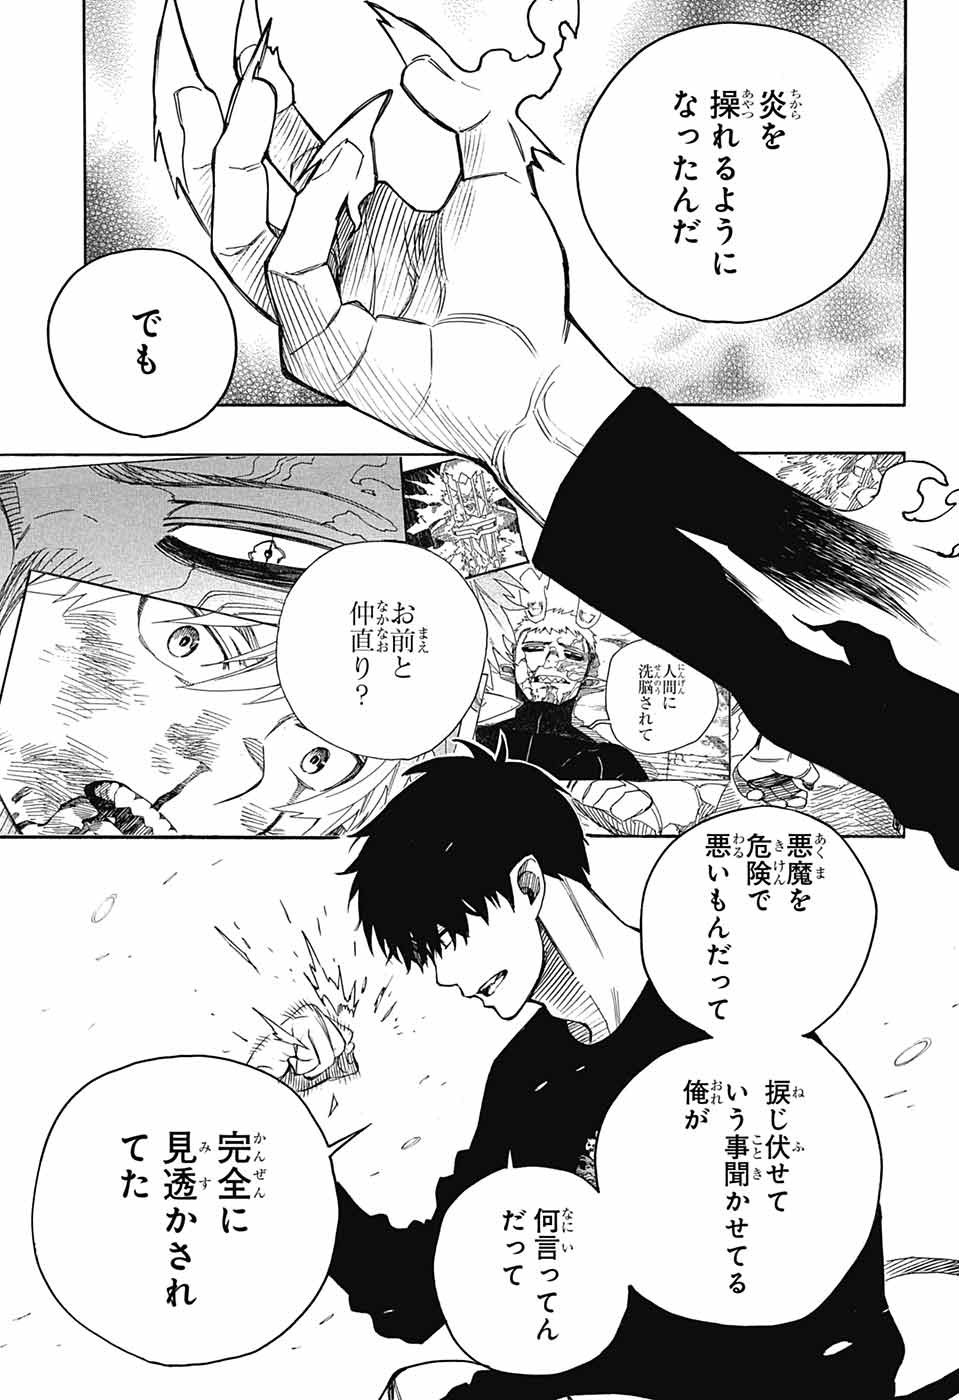 Ao no Exorcist - Chapter 143 - Page 30